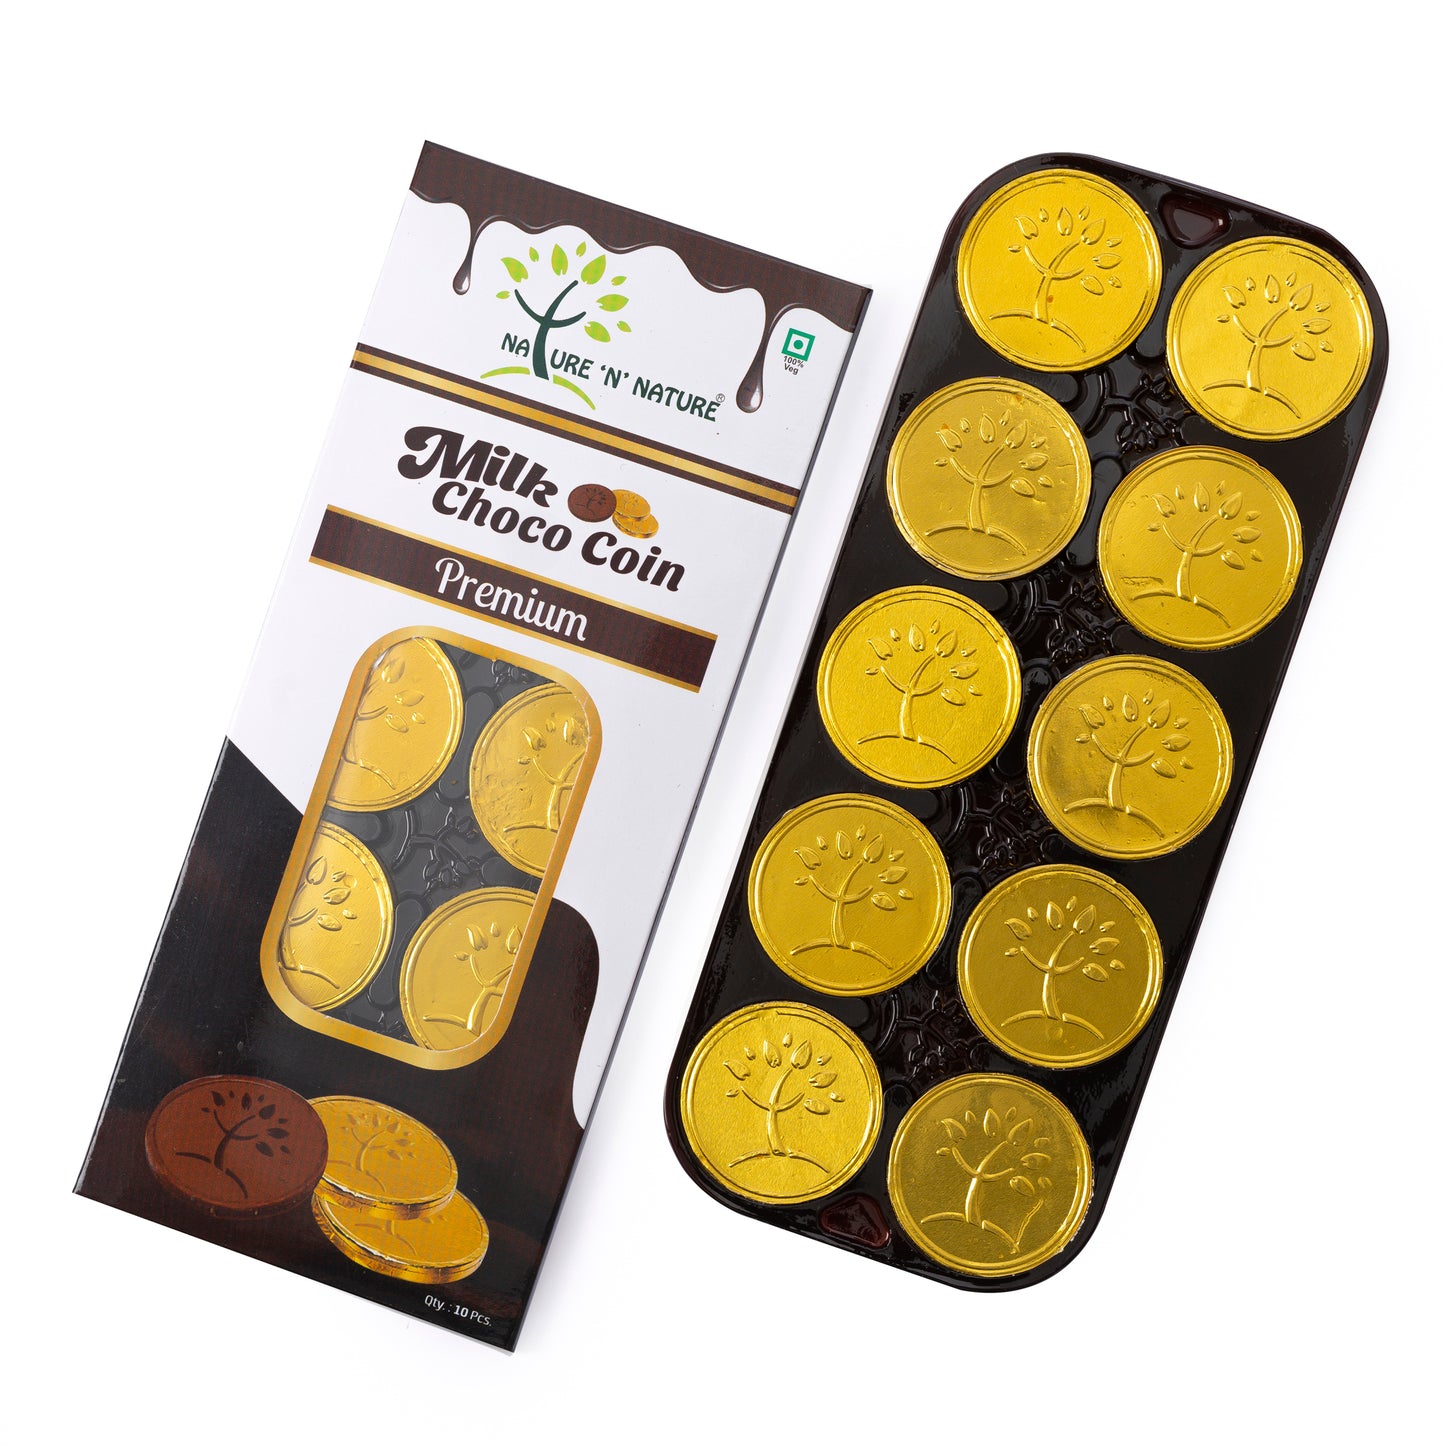 NATURE 'N' NATURE Gold Coin Milk Chocolate Premium Pack, 60gms (10 Big Coins), Pack of 2